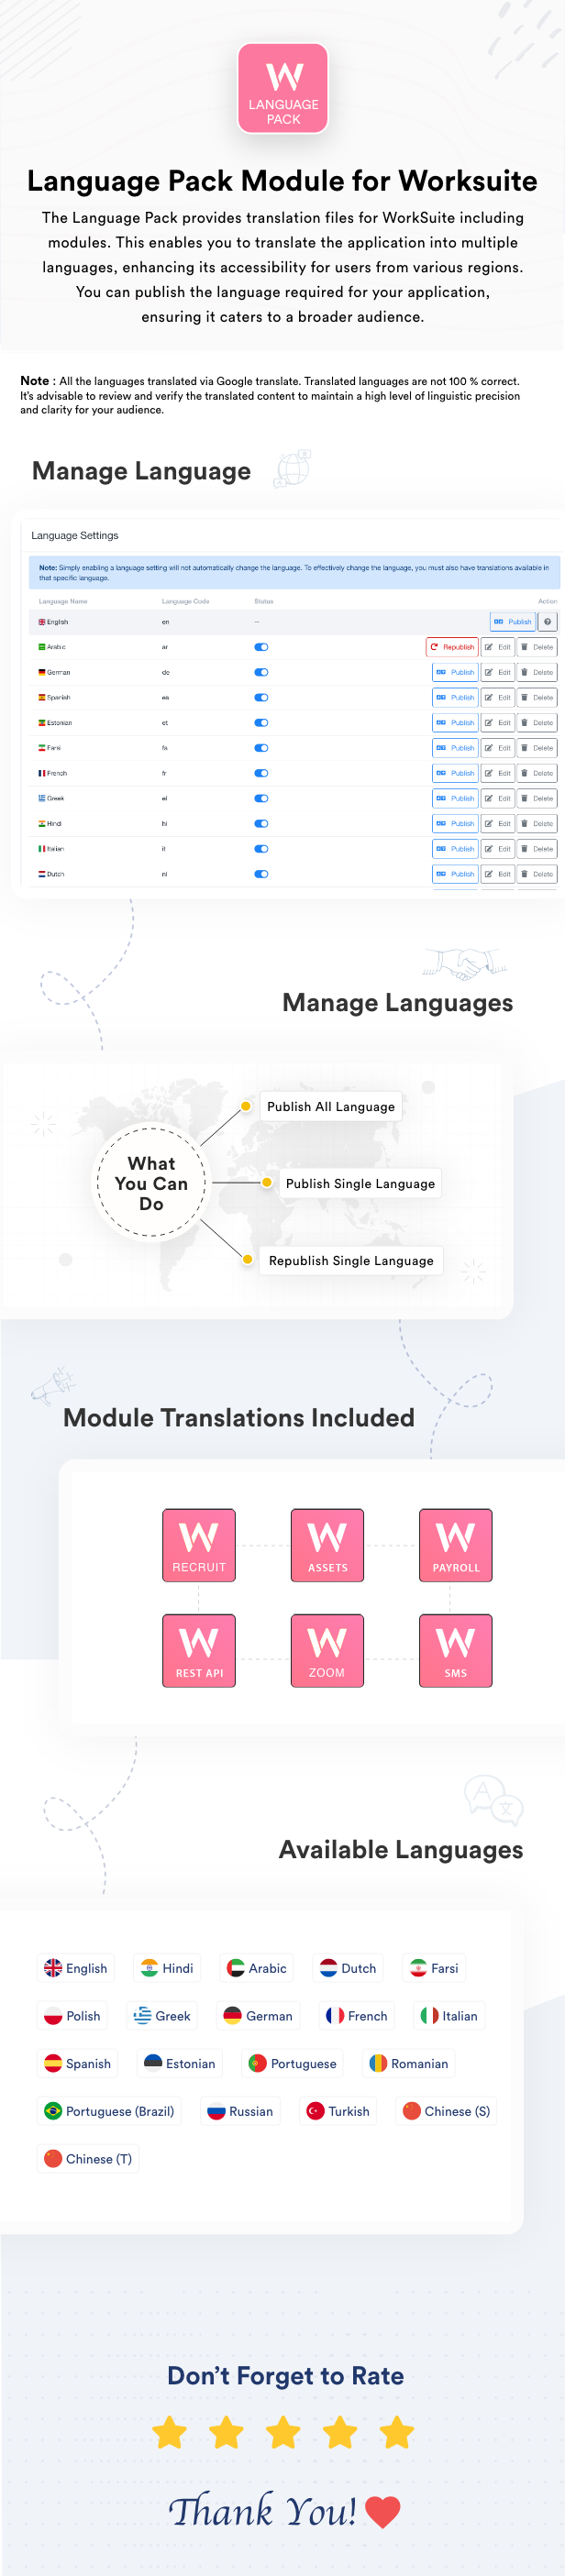 Language Pack Module for Worksuite CRM - 1